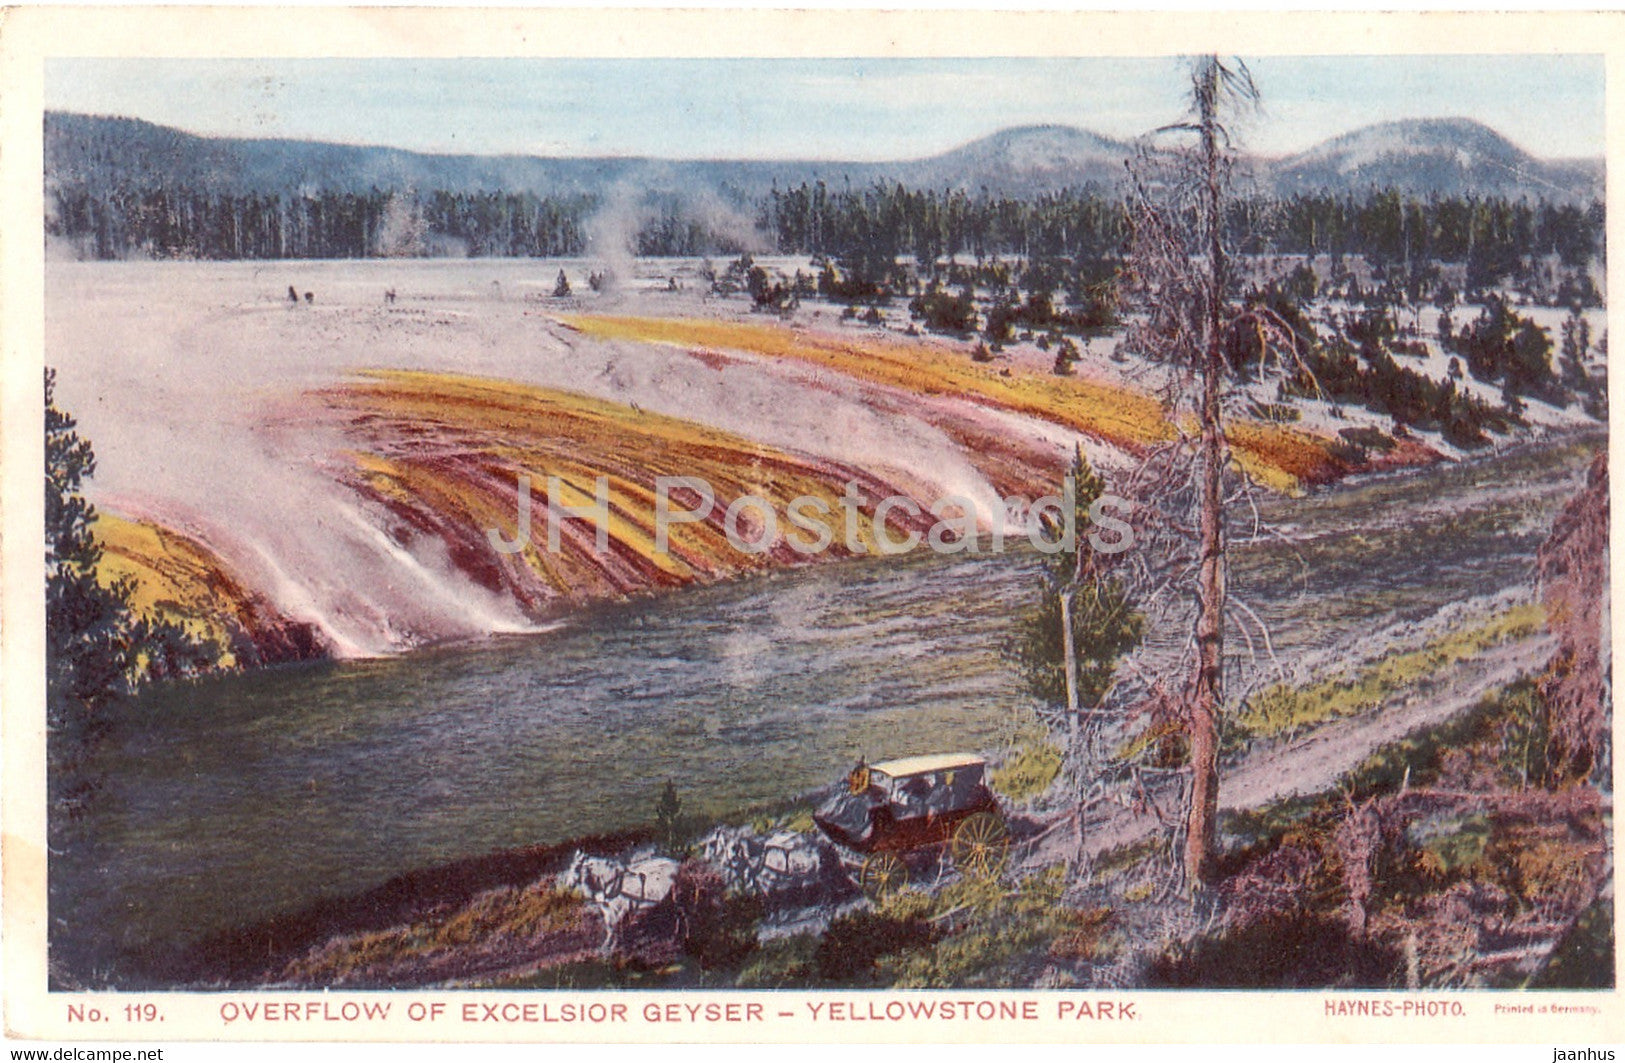 Overflow of Excelsior Geyser - Yellowstone Park - 119 - old postcard - 1909 - United States - USA - used - JH Postcards